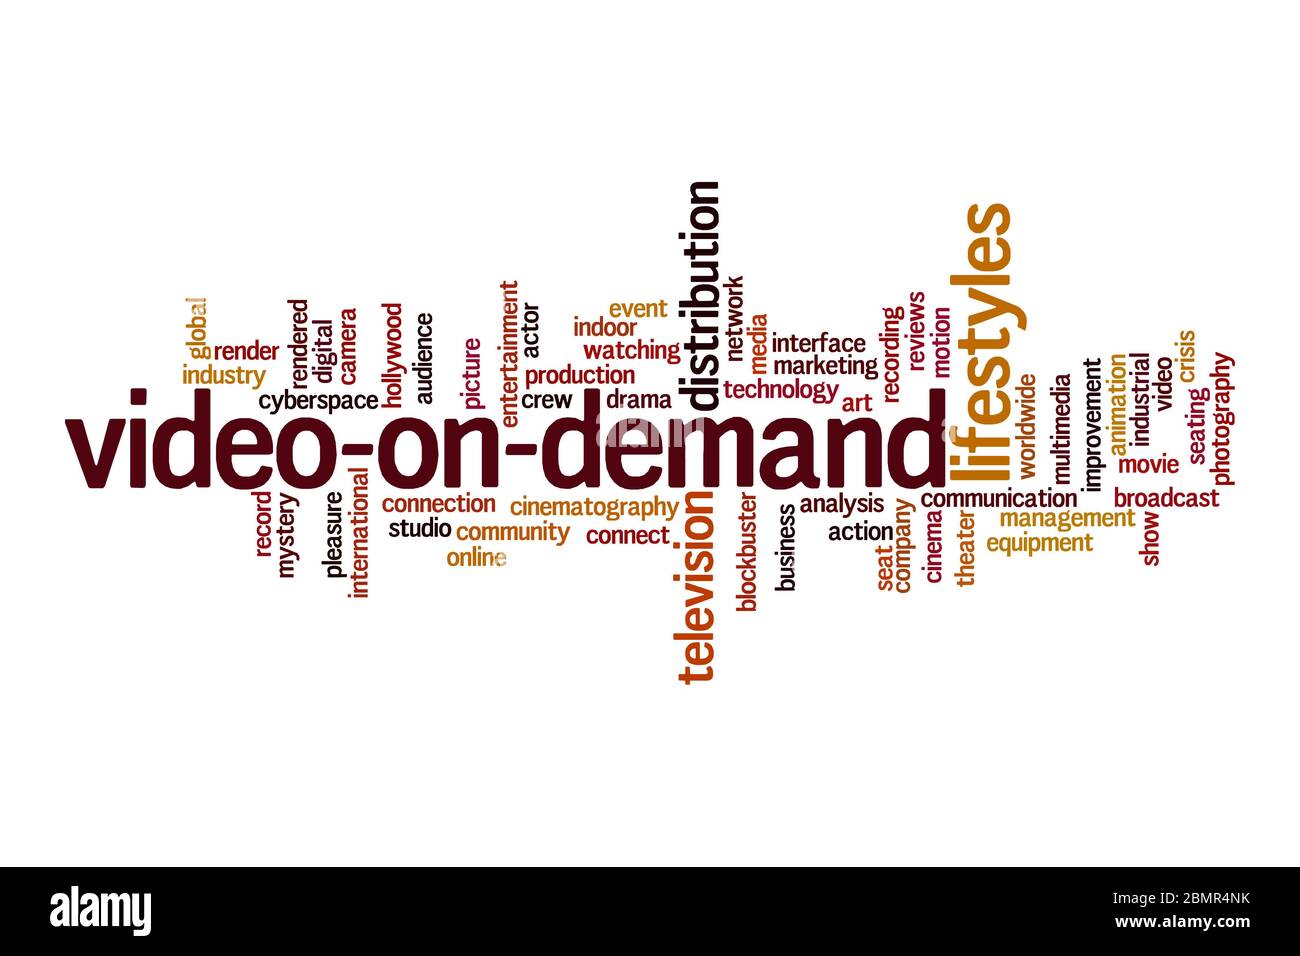 Video-on-demand word cloud concept on white background Stock Photo